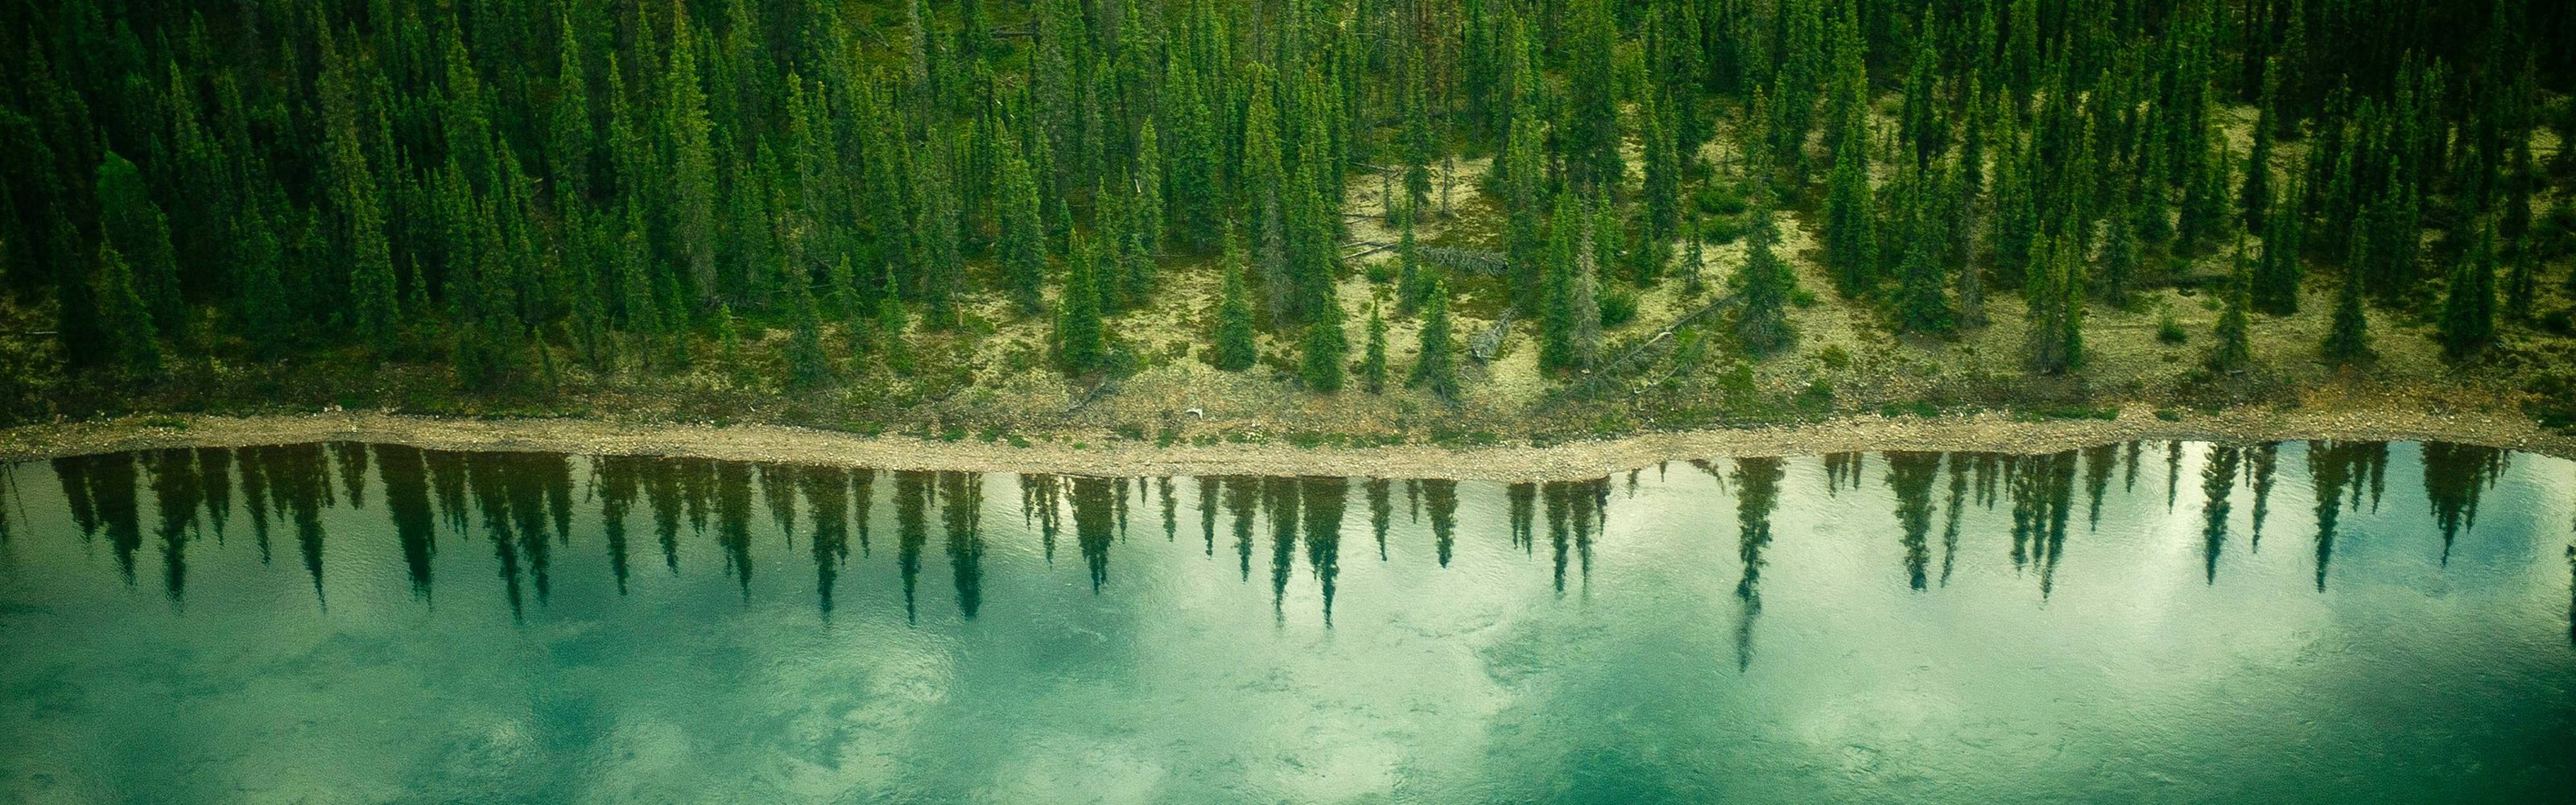 Aerial view of the Thelon River and forest landscape of Canada's far northern Thelon Game Sanctuary.